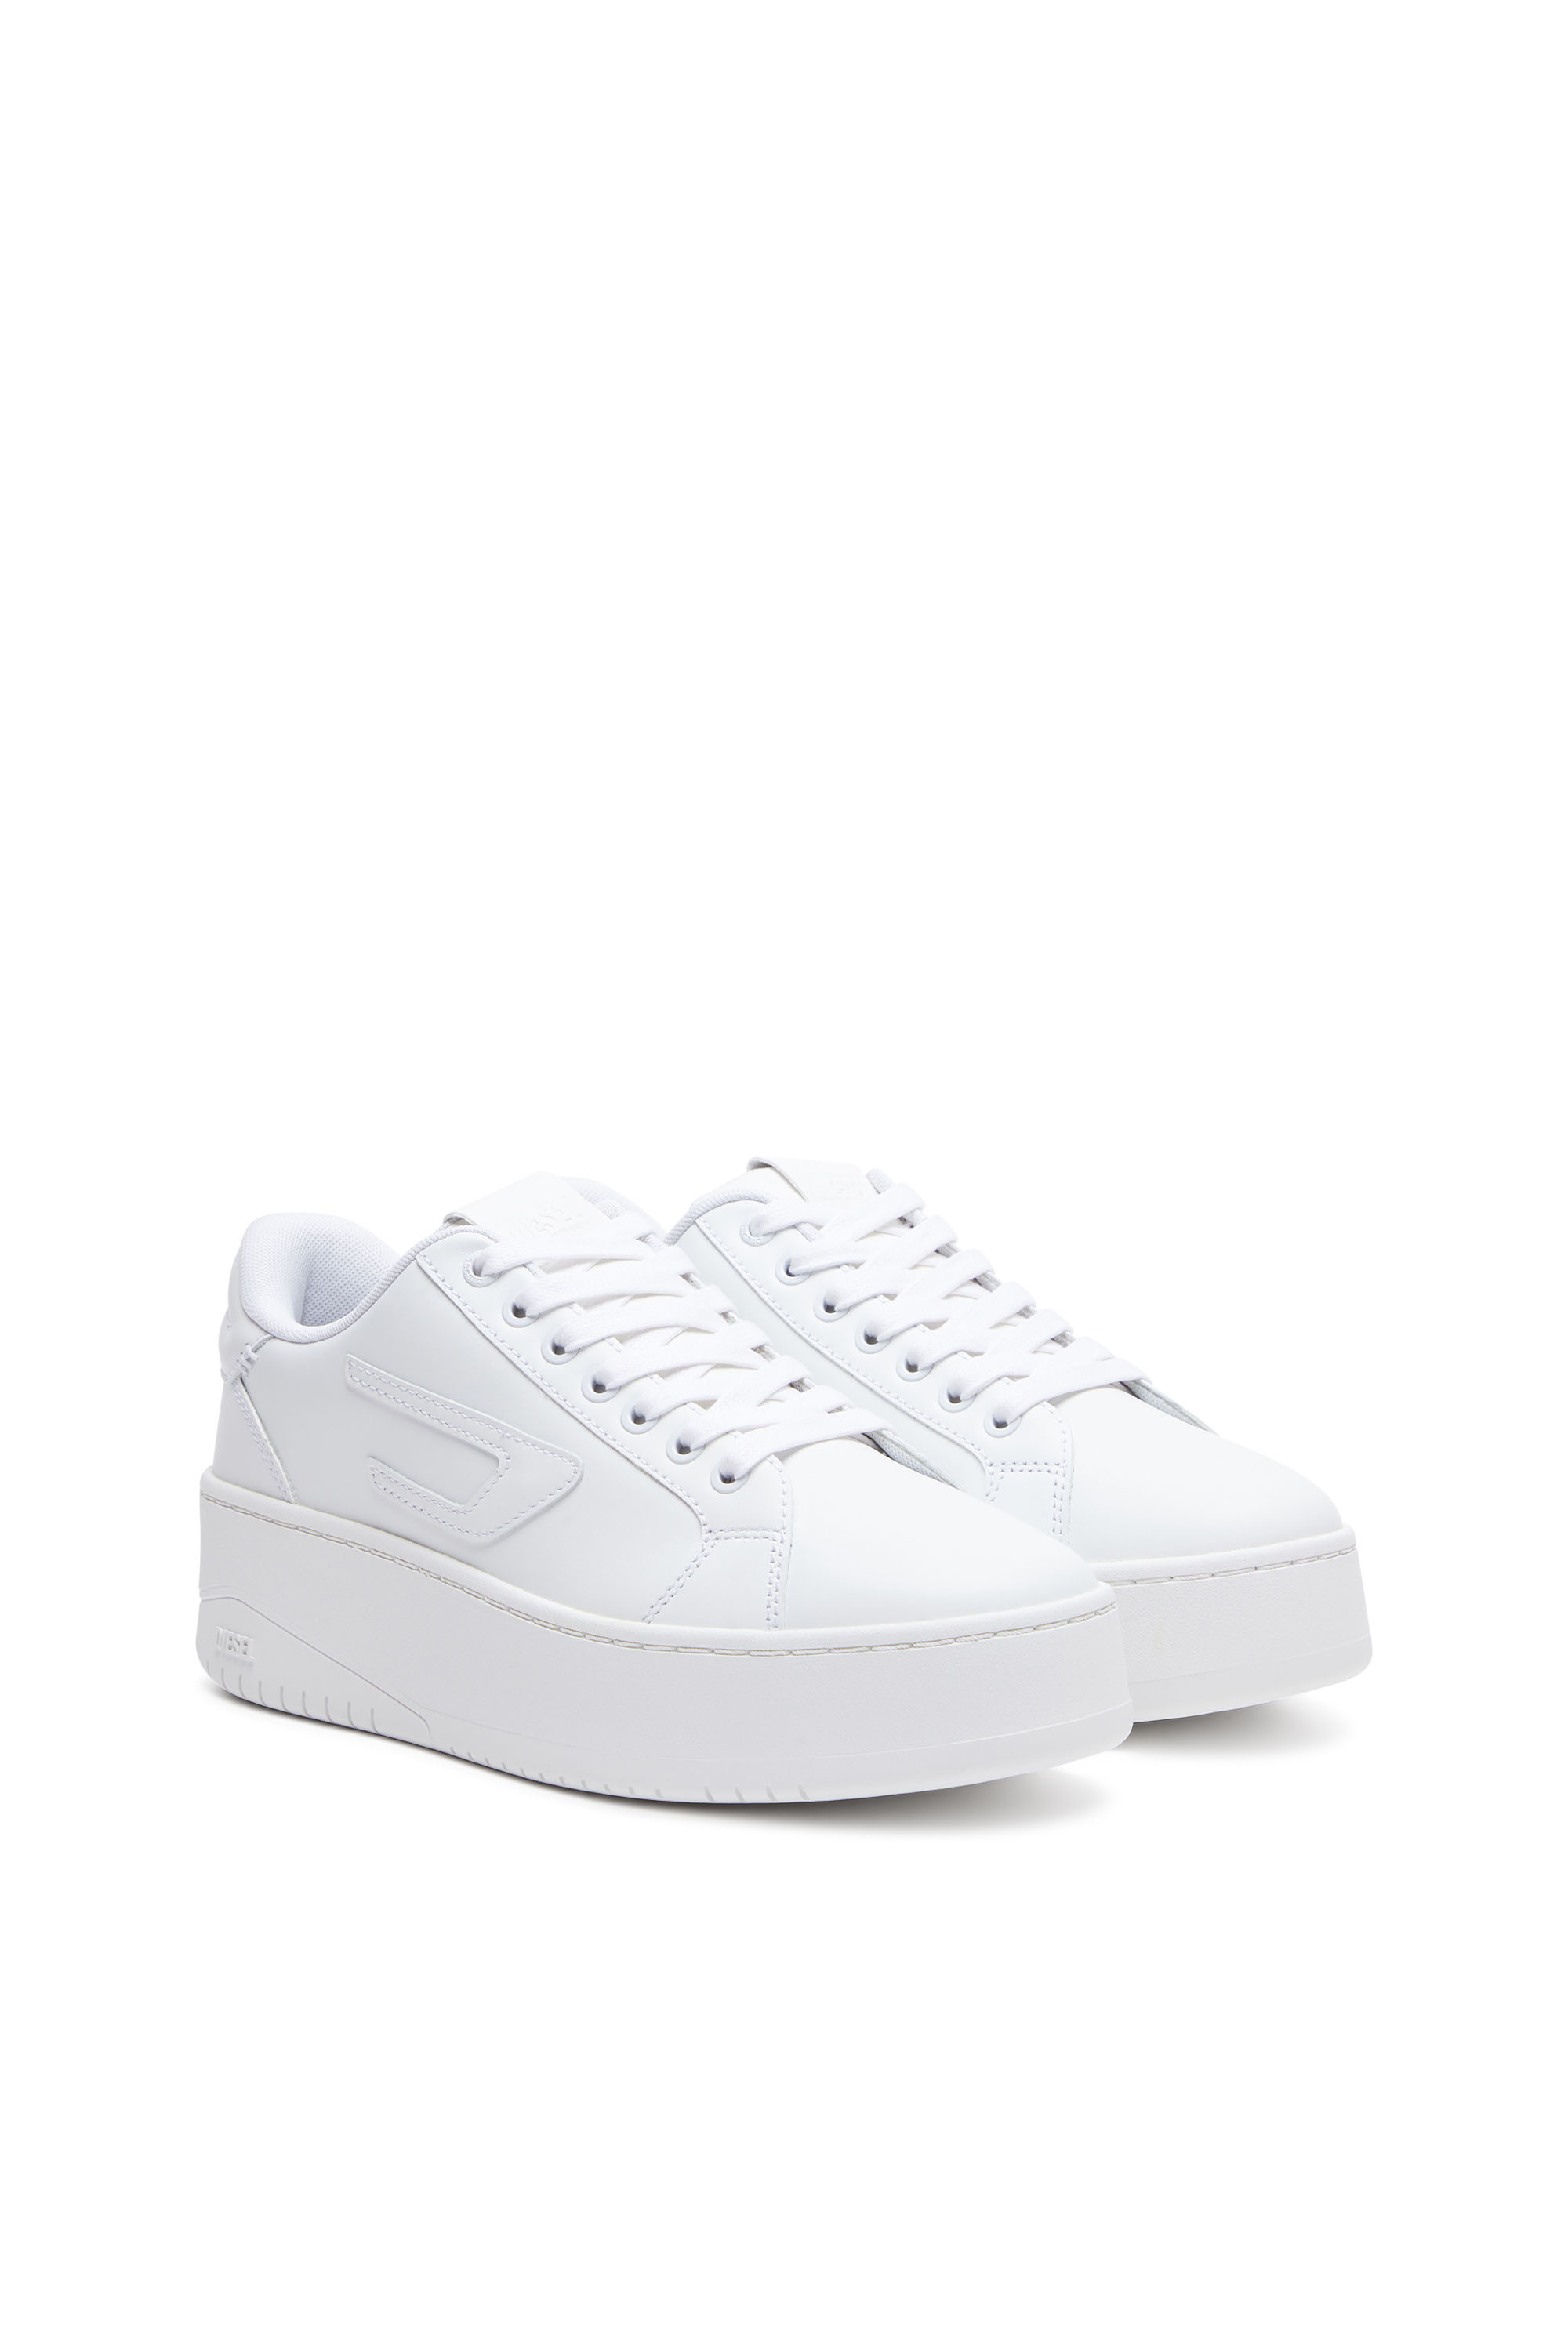 Diesel - S-ATHENE BOLD X, Woman S-Athene Bold-Flatform sneakers in leather in White - Image 2